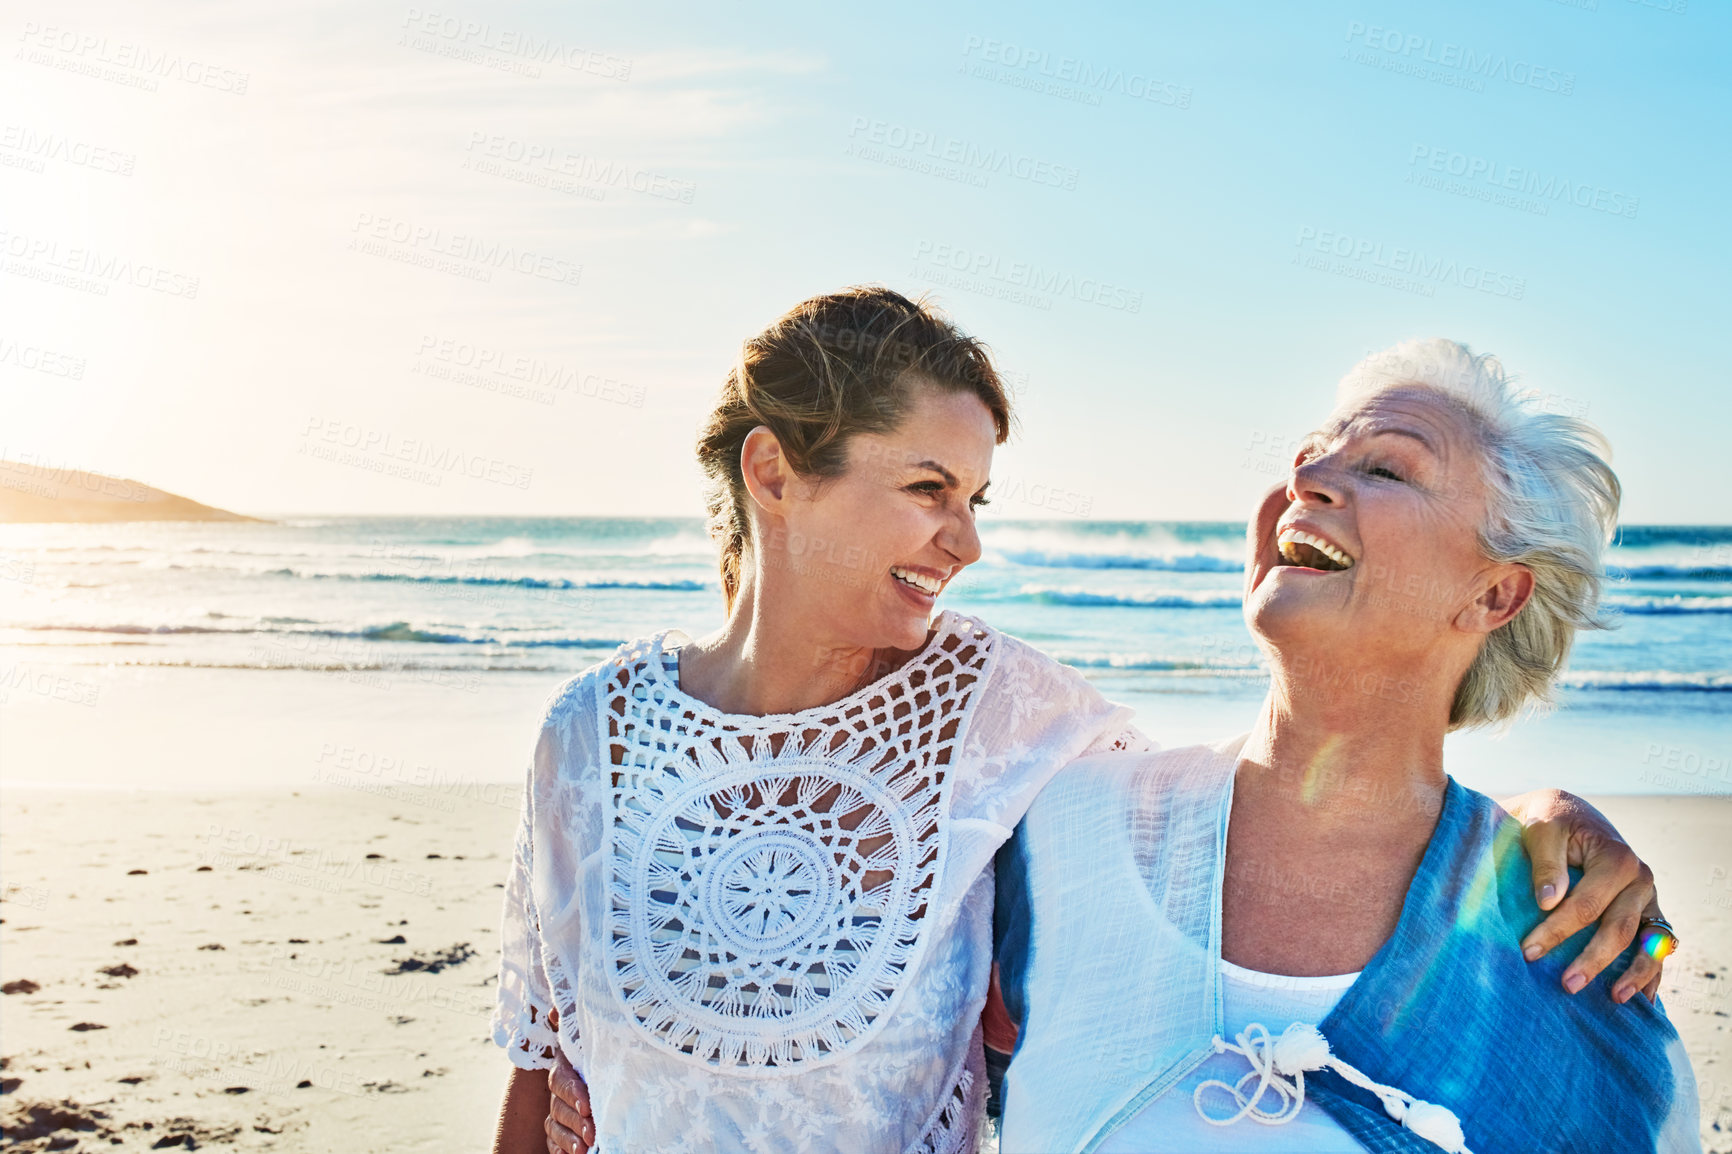 Buy stock photo Cropped shot of a senior woman and her adult daughter spending a day at the beach